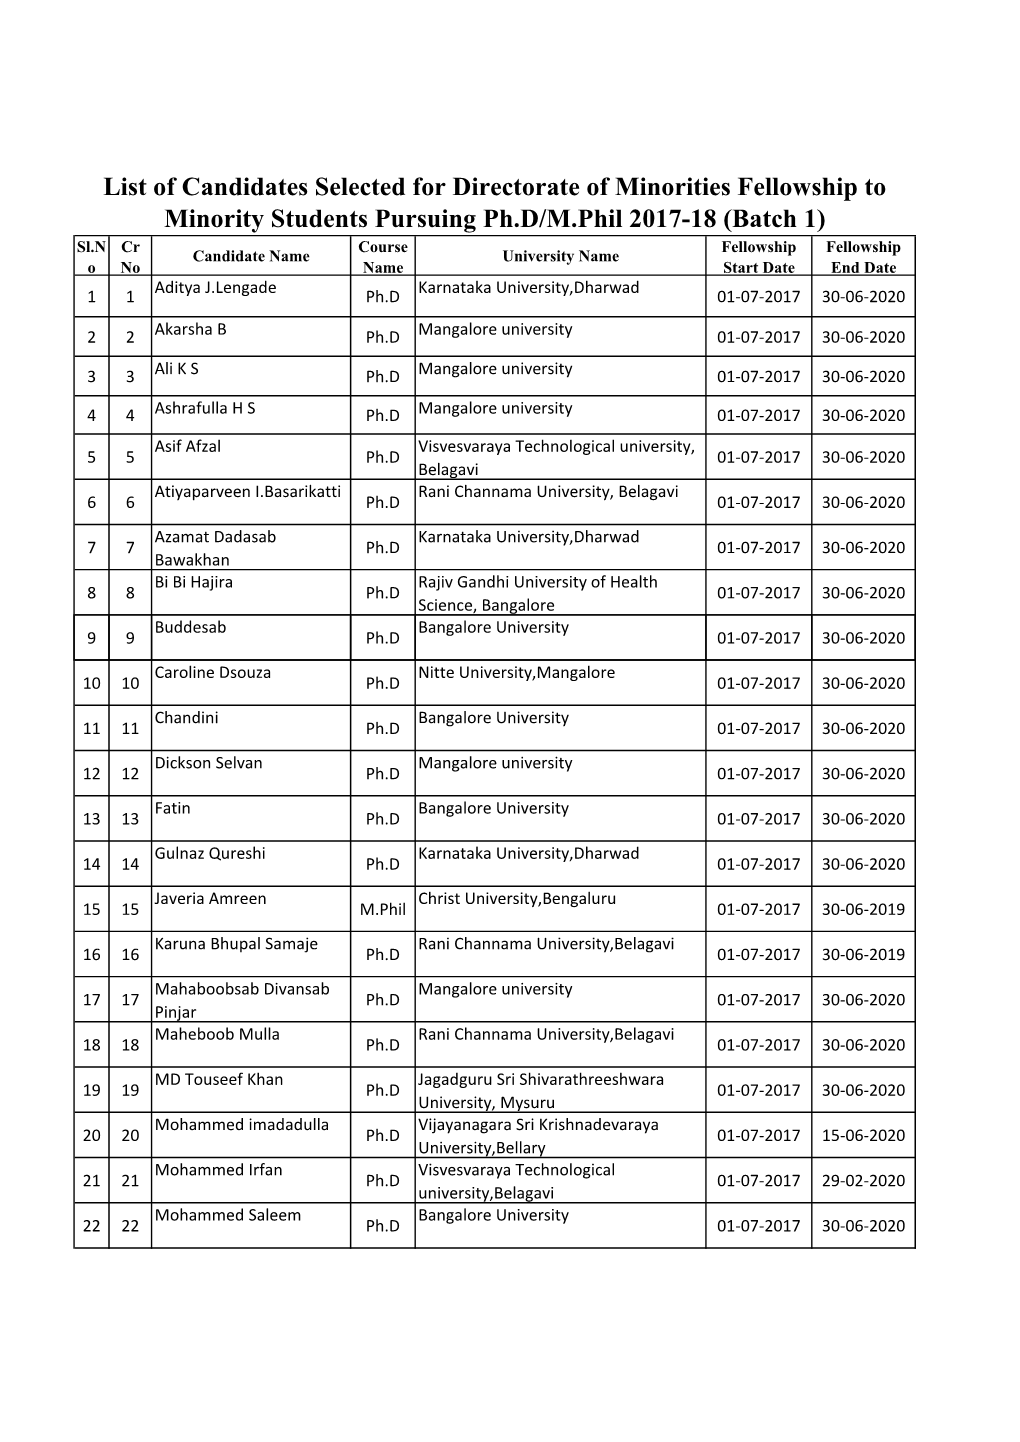 List of Candidates Selected for Mphil & Phd Fellowship 2017-18